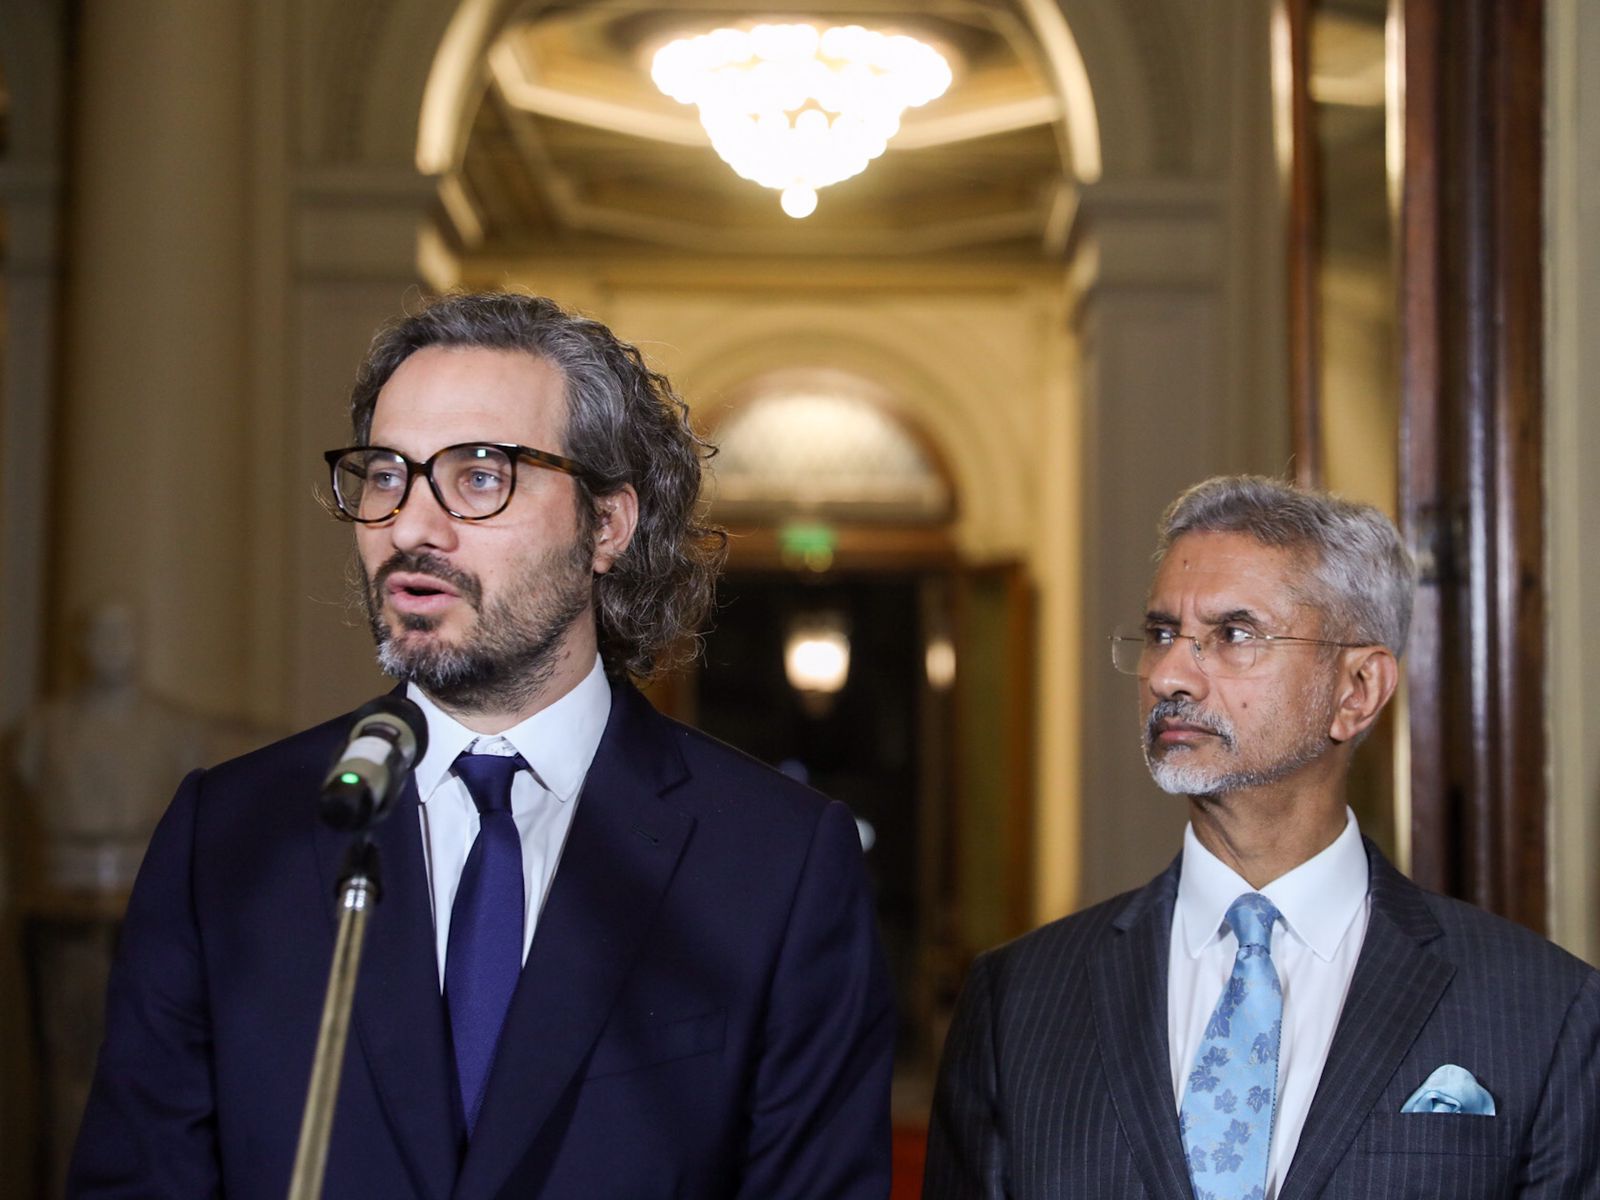 Santiago Cafiero with Subramaniam Jaishankar after a meeting with the President